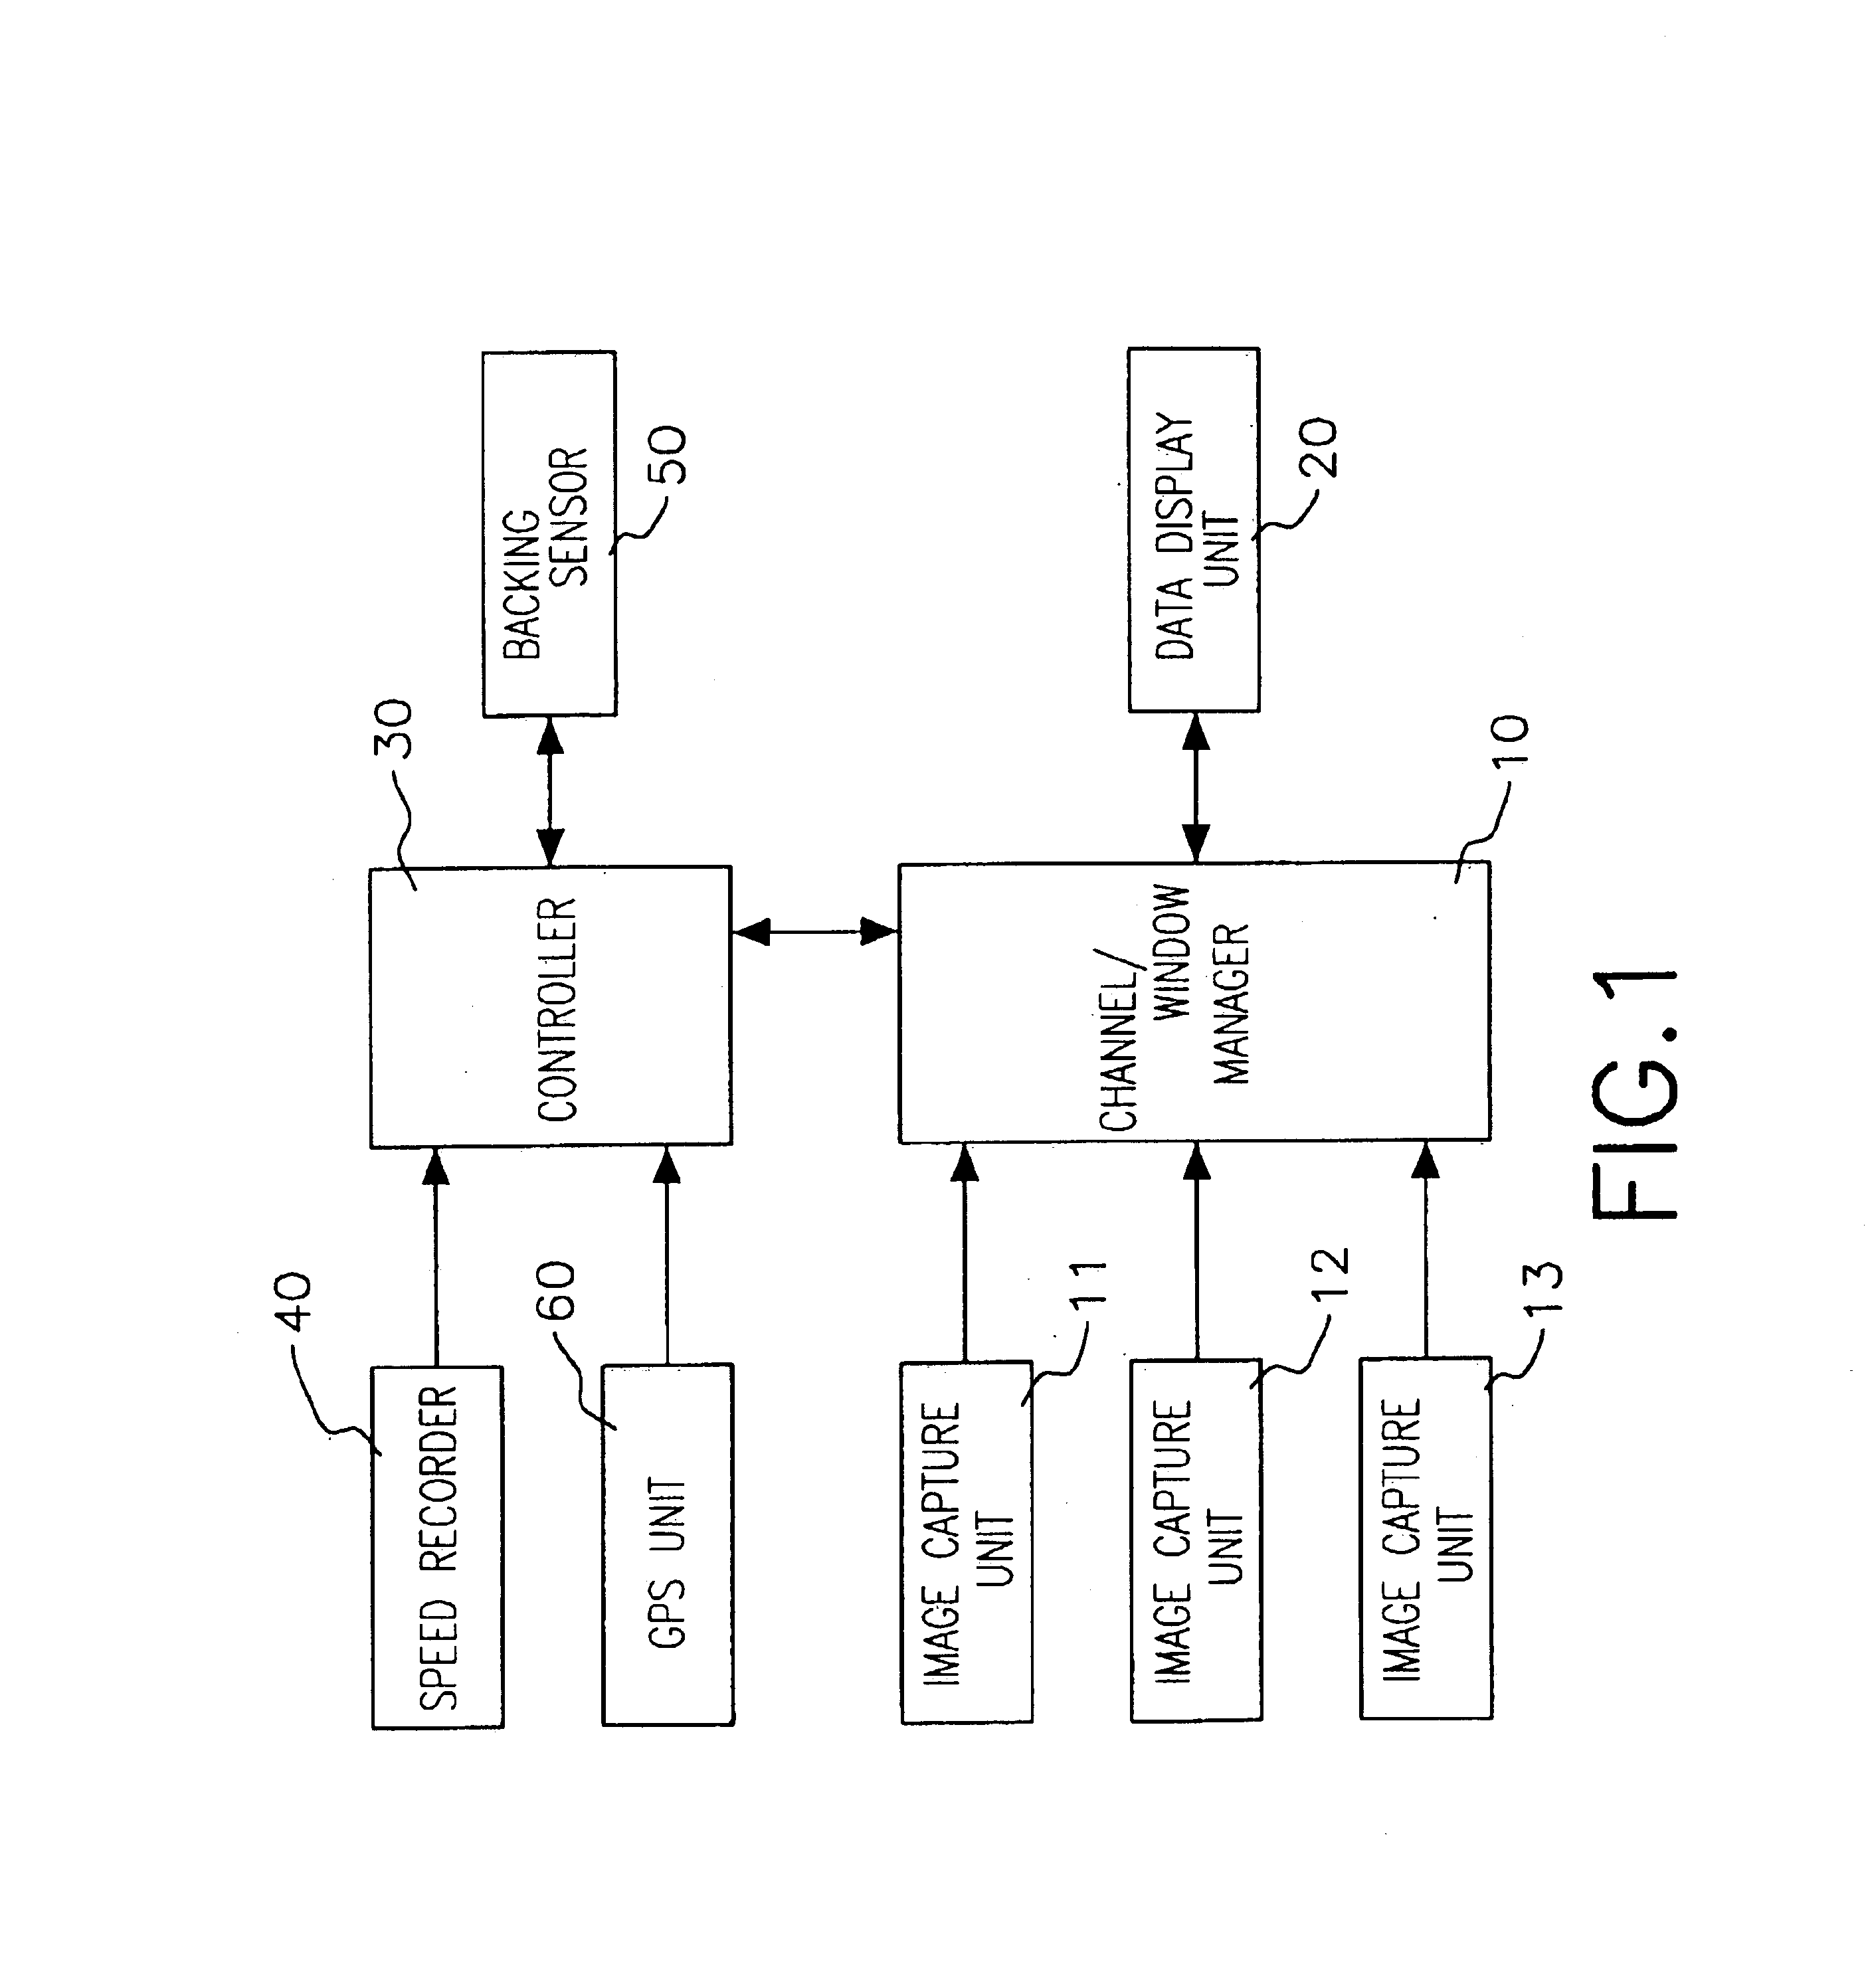 Driver information feedback and display system